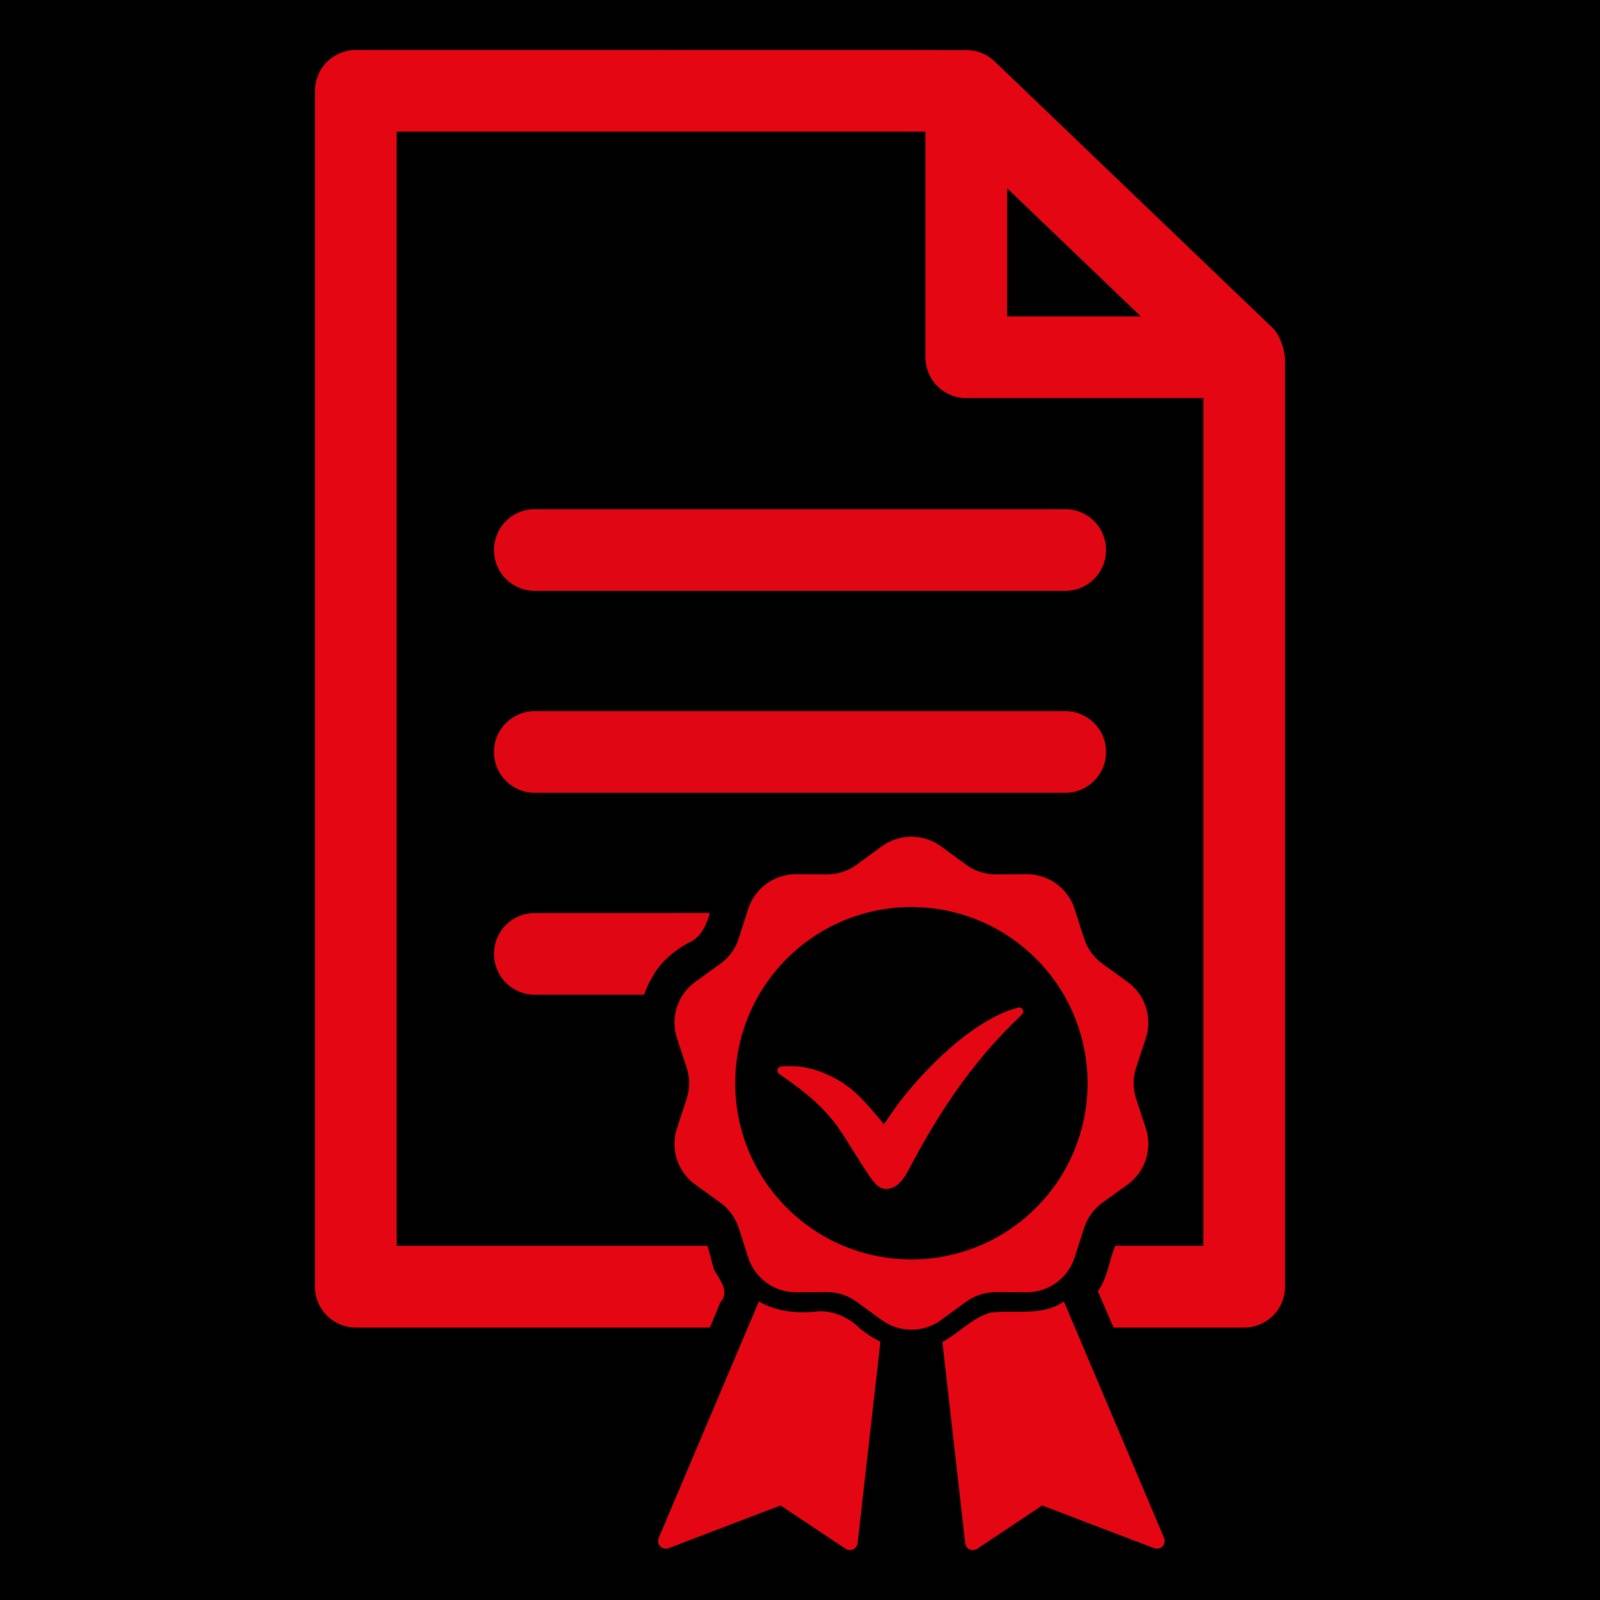 Certified vector icon. Style is flat symbol, red color, rounded angles, black background.